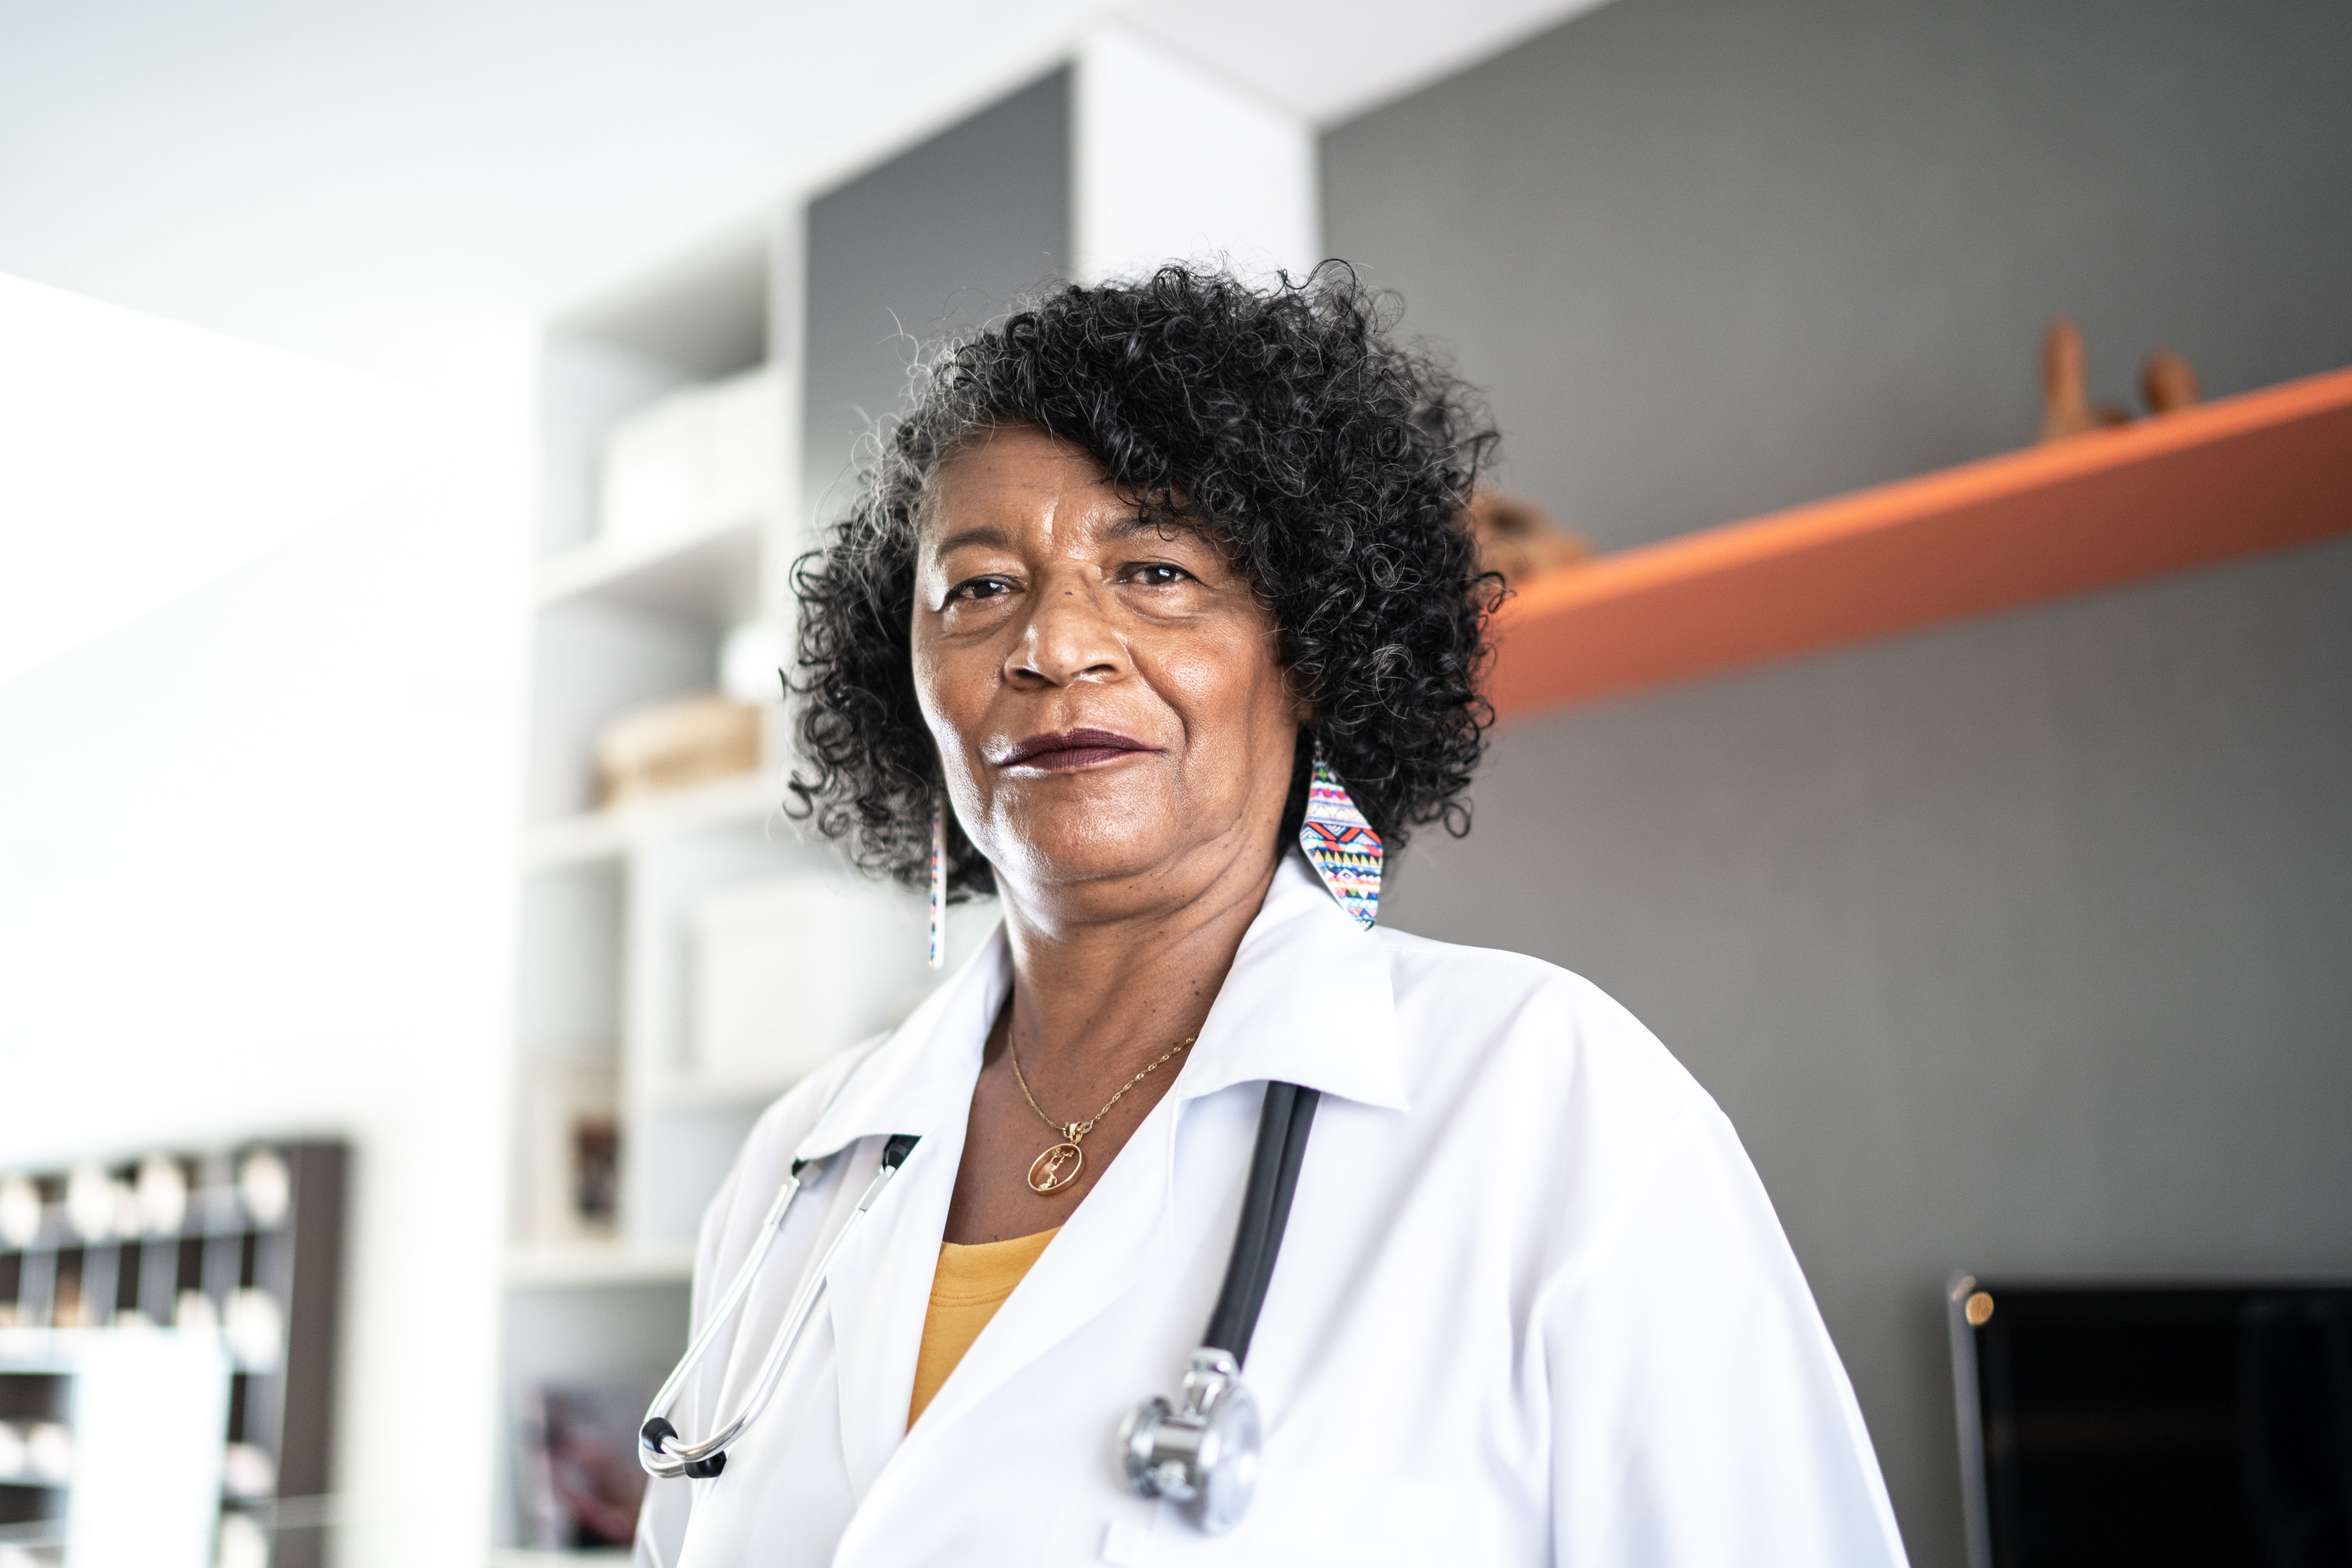 Portrait of a Black female doctor